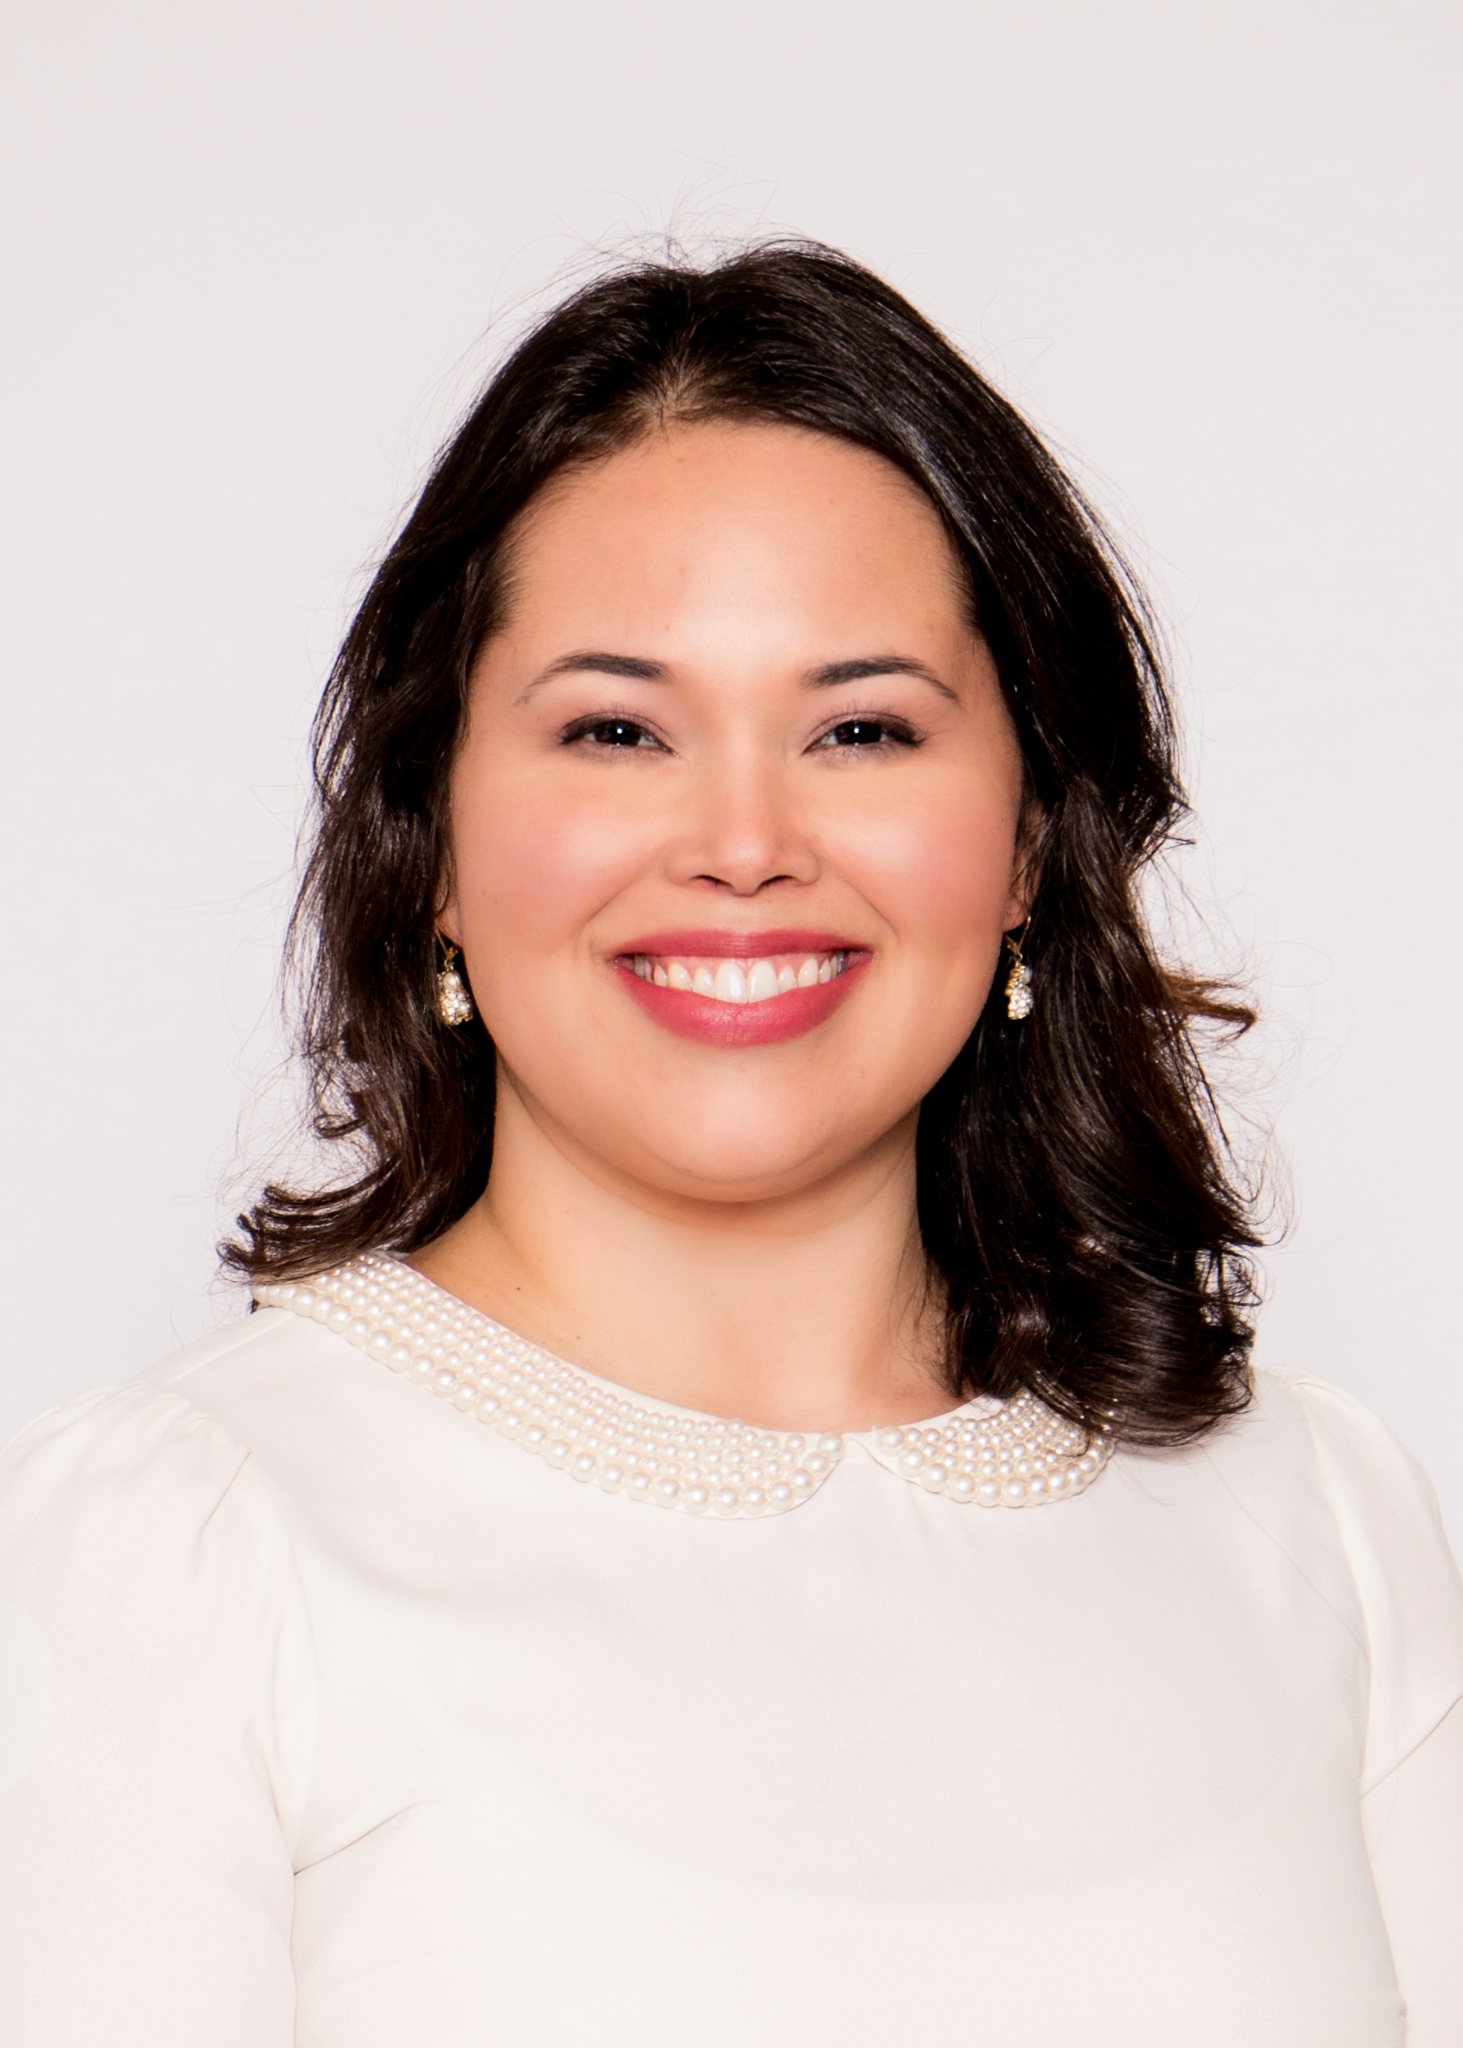 Career educator Michelle Seijas, EdD, will lead Surge Oakland in the mission to educate and develop leaders of color who create transformative change in urban education.